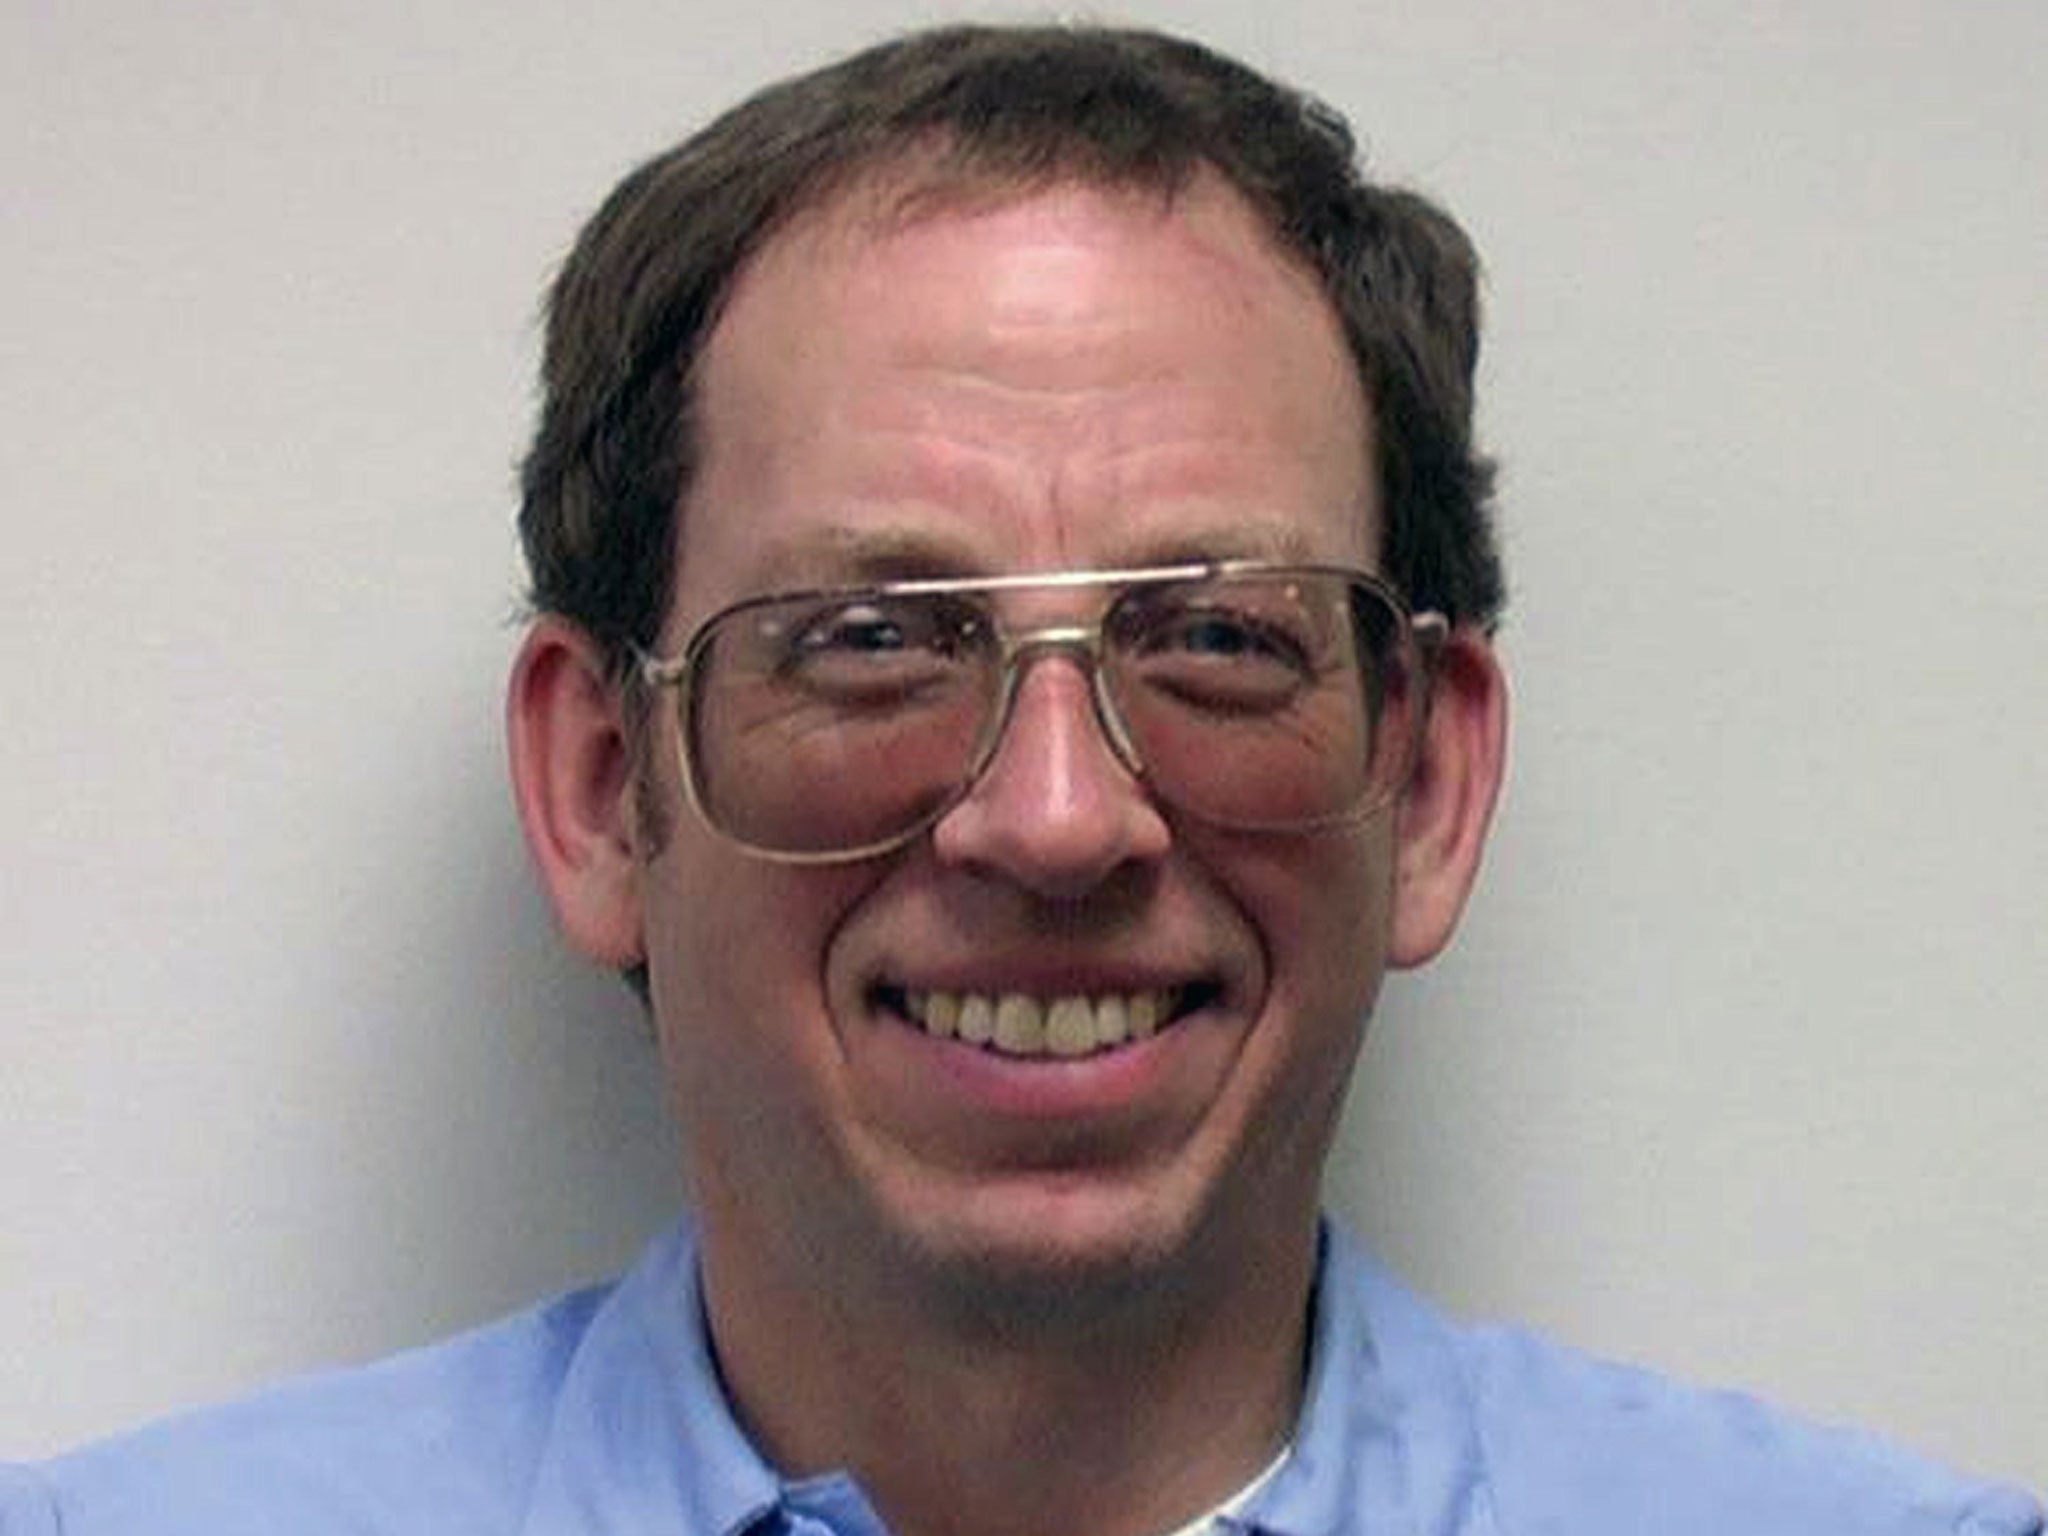 A file photo issued by Moraine, Ohio shows Jeffrey Fowle, one of two detained American tourists who North Korea said would face trial for charges including 'perpetrating hostile acts'